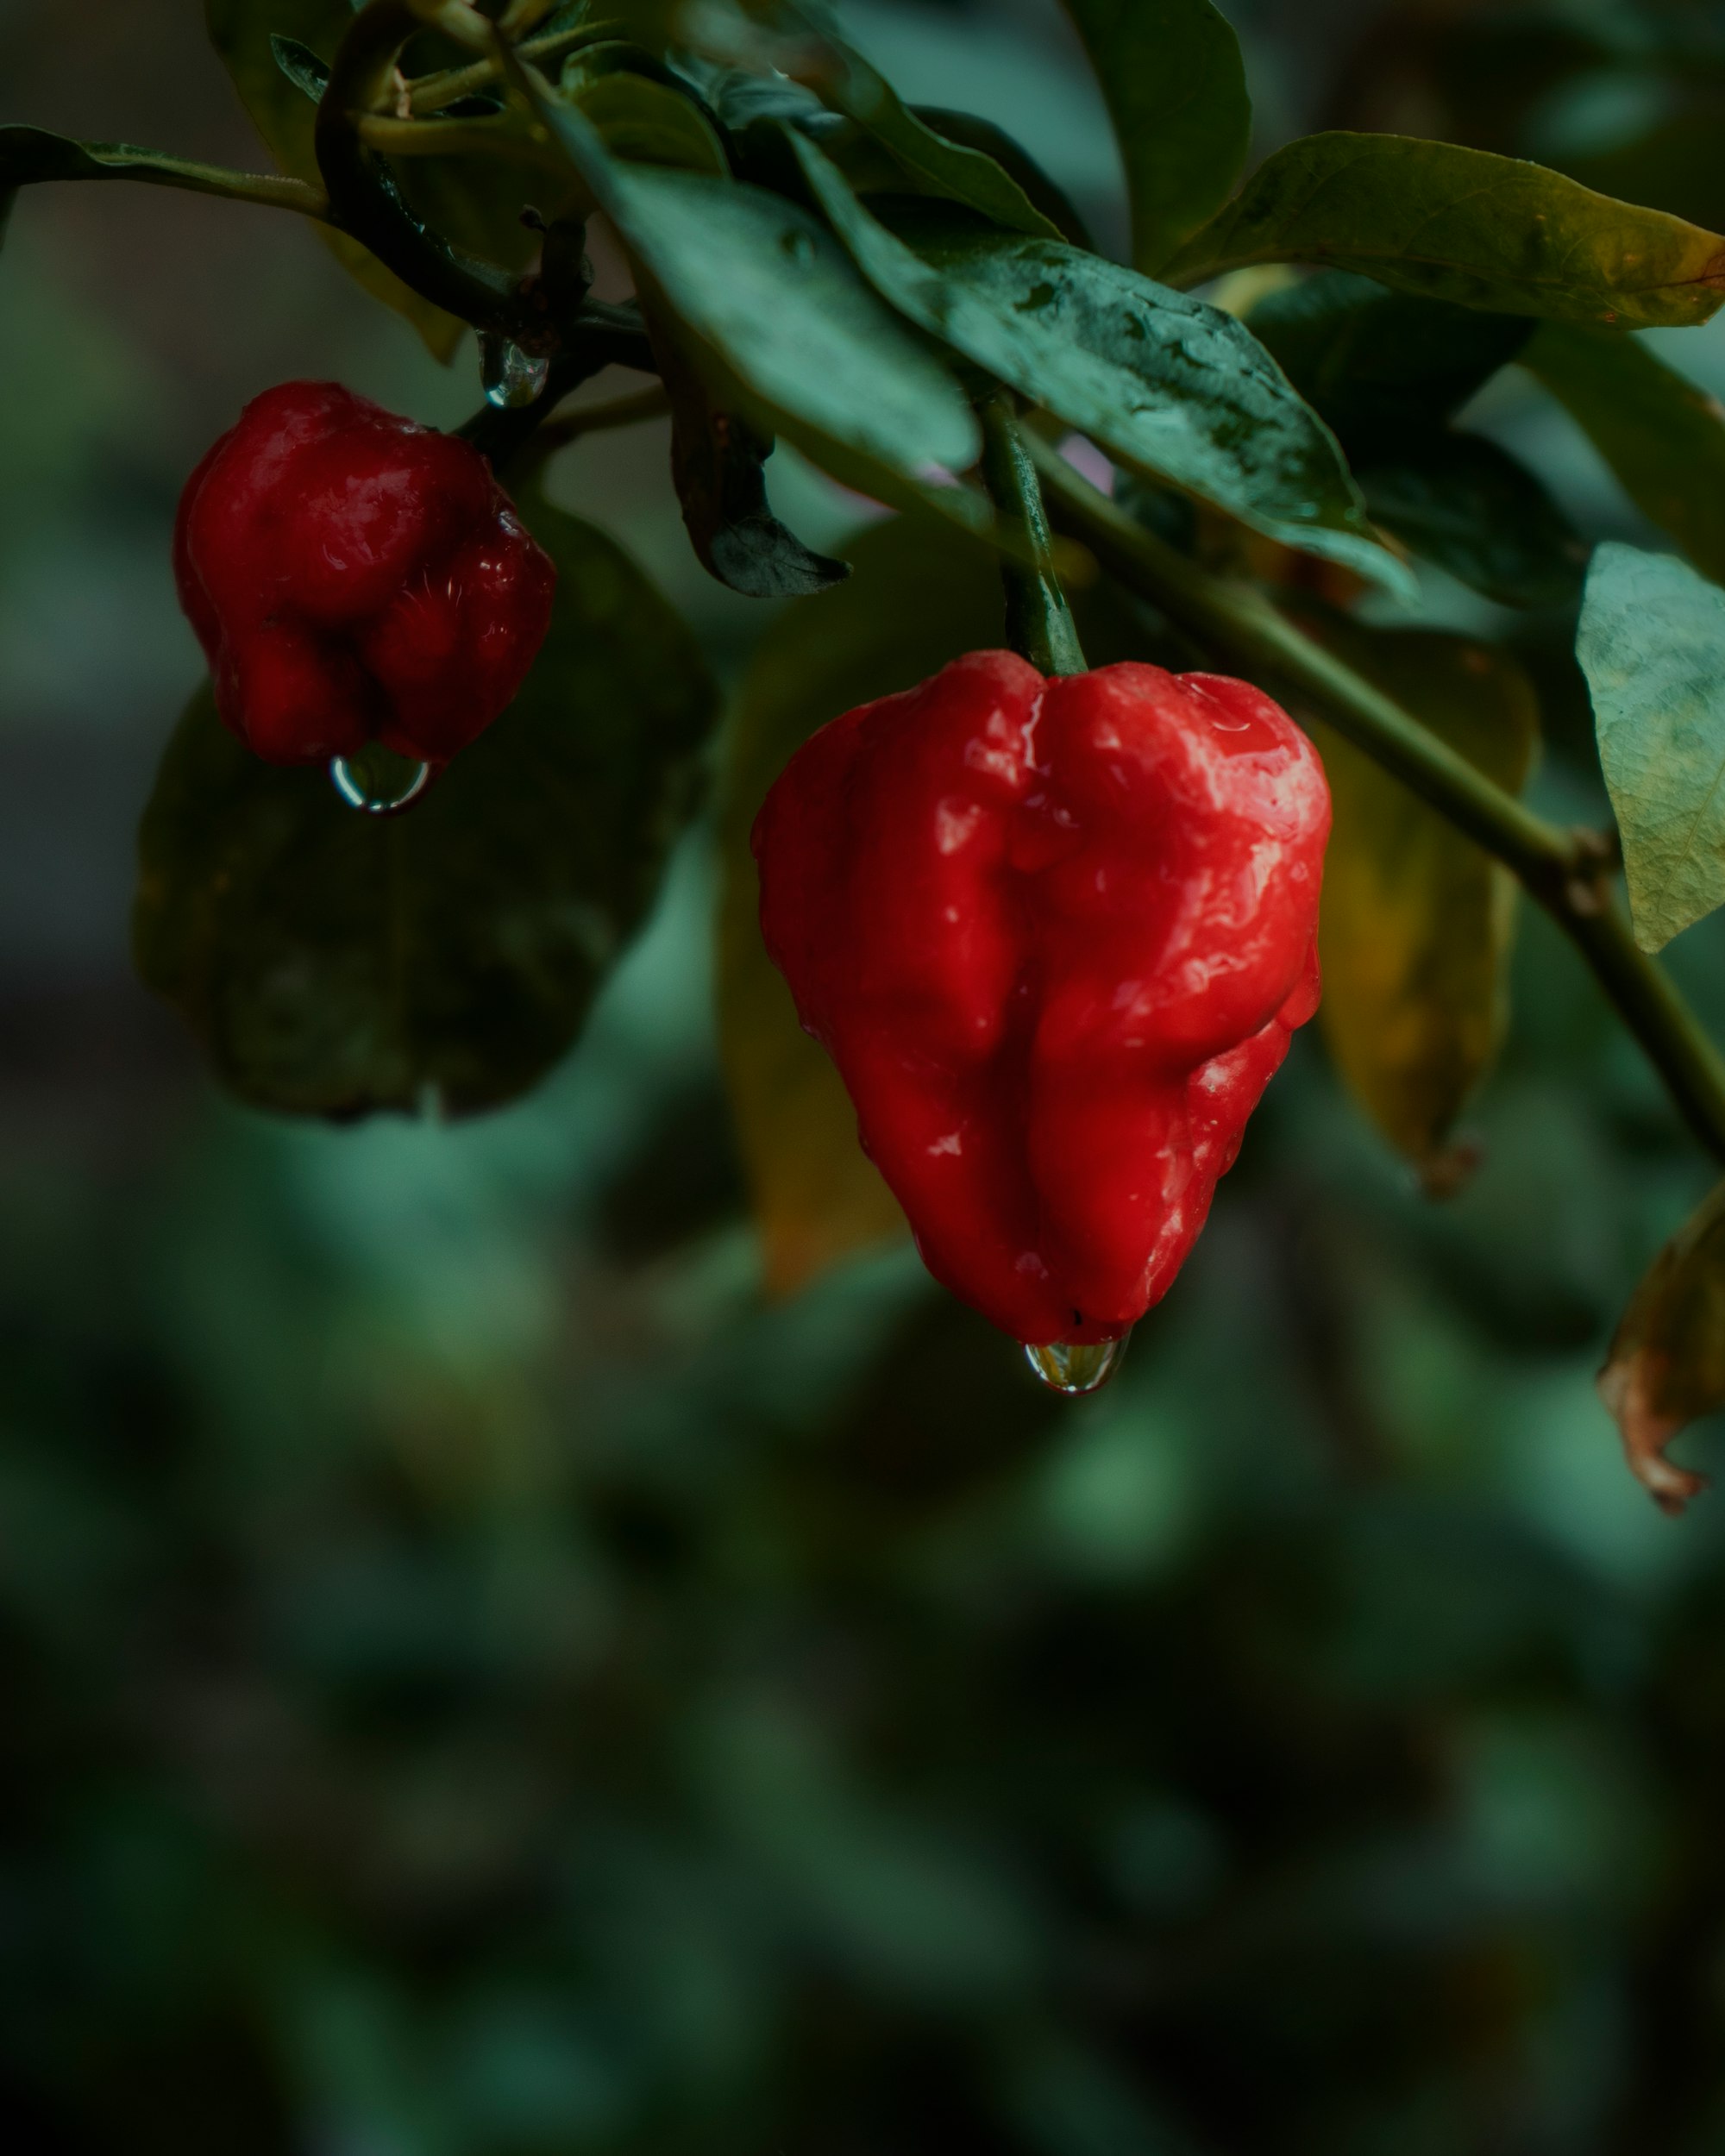 The Naga Morich, also known as the "Dorset Naga Pepper", is a chilli pepper native to North East India, and the Sylhet region of Bangladesh. It is known as the sister chilli to the Bhut Jolokia or Ghost Chilli. The Naga Morich bears many similarities to its sister but is genetically different. It is also one of the hottest known chilli peppers.